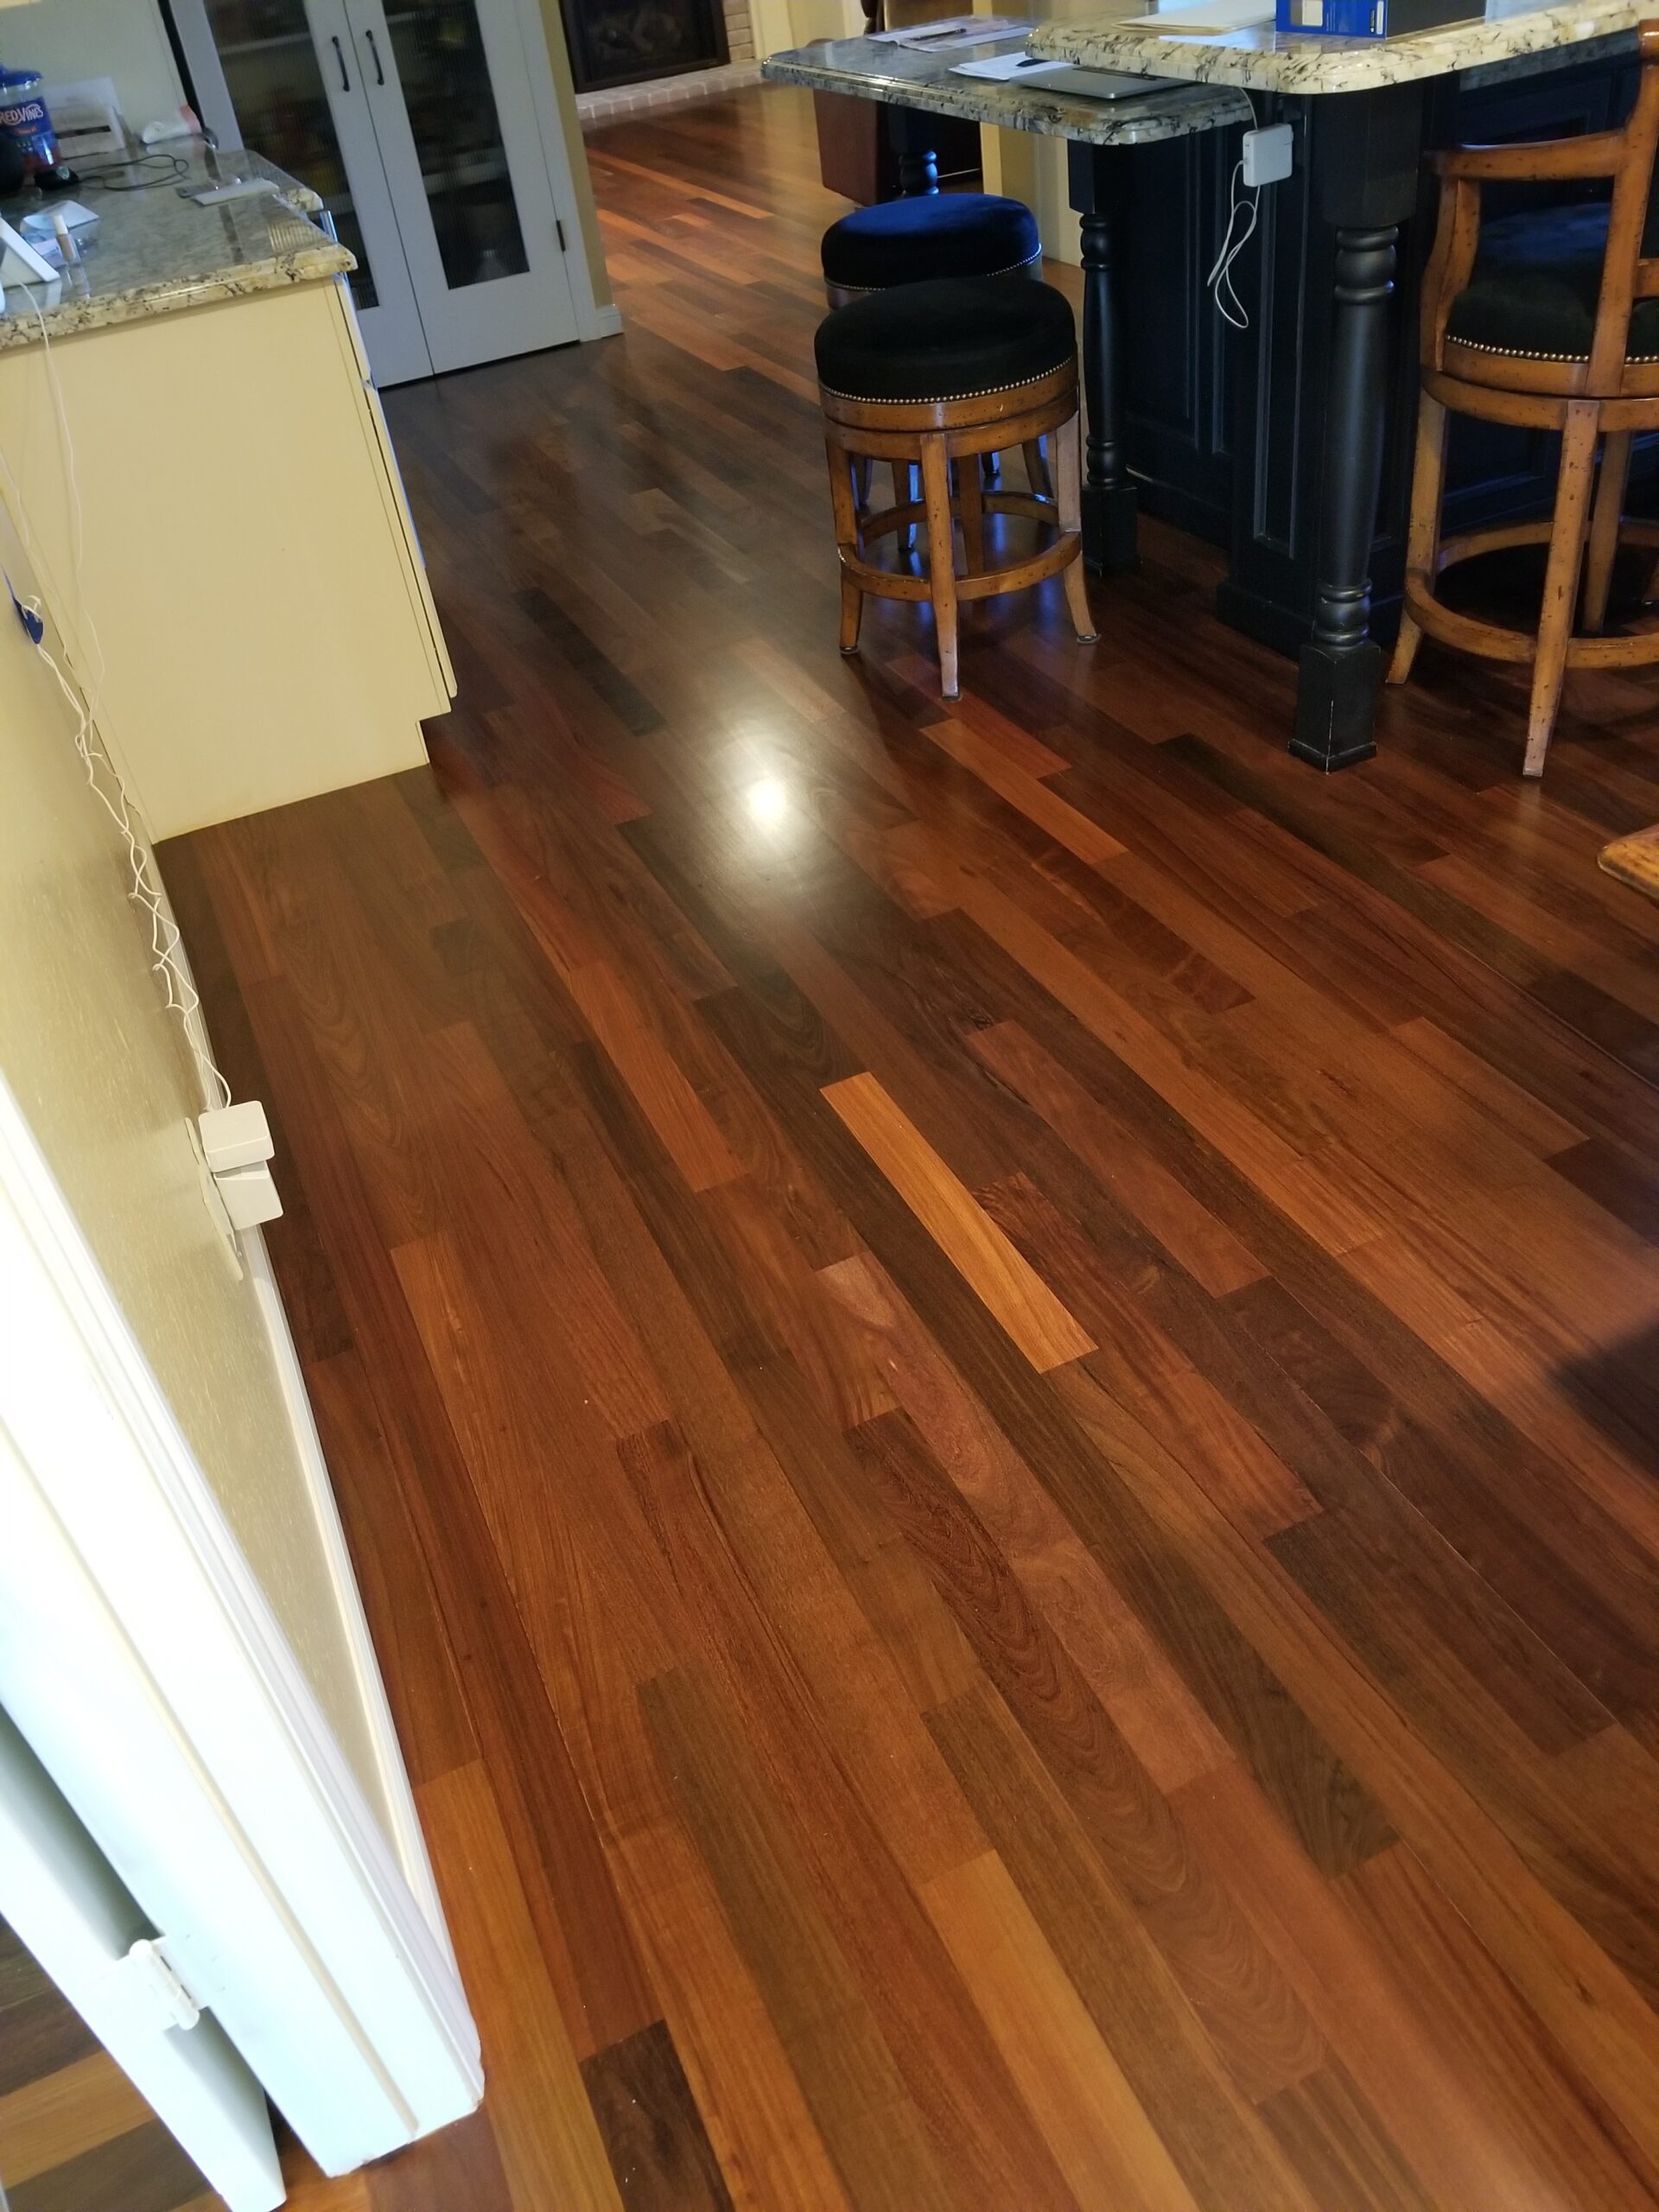 Los Altos residential — kitchen, dinette, family room; refinish Brazilian walnut with three coats of a semi-gloss water-base finish.  750 sq ft refinish.  